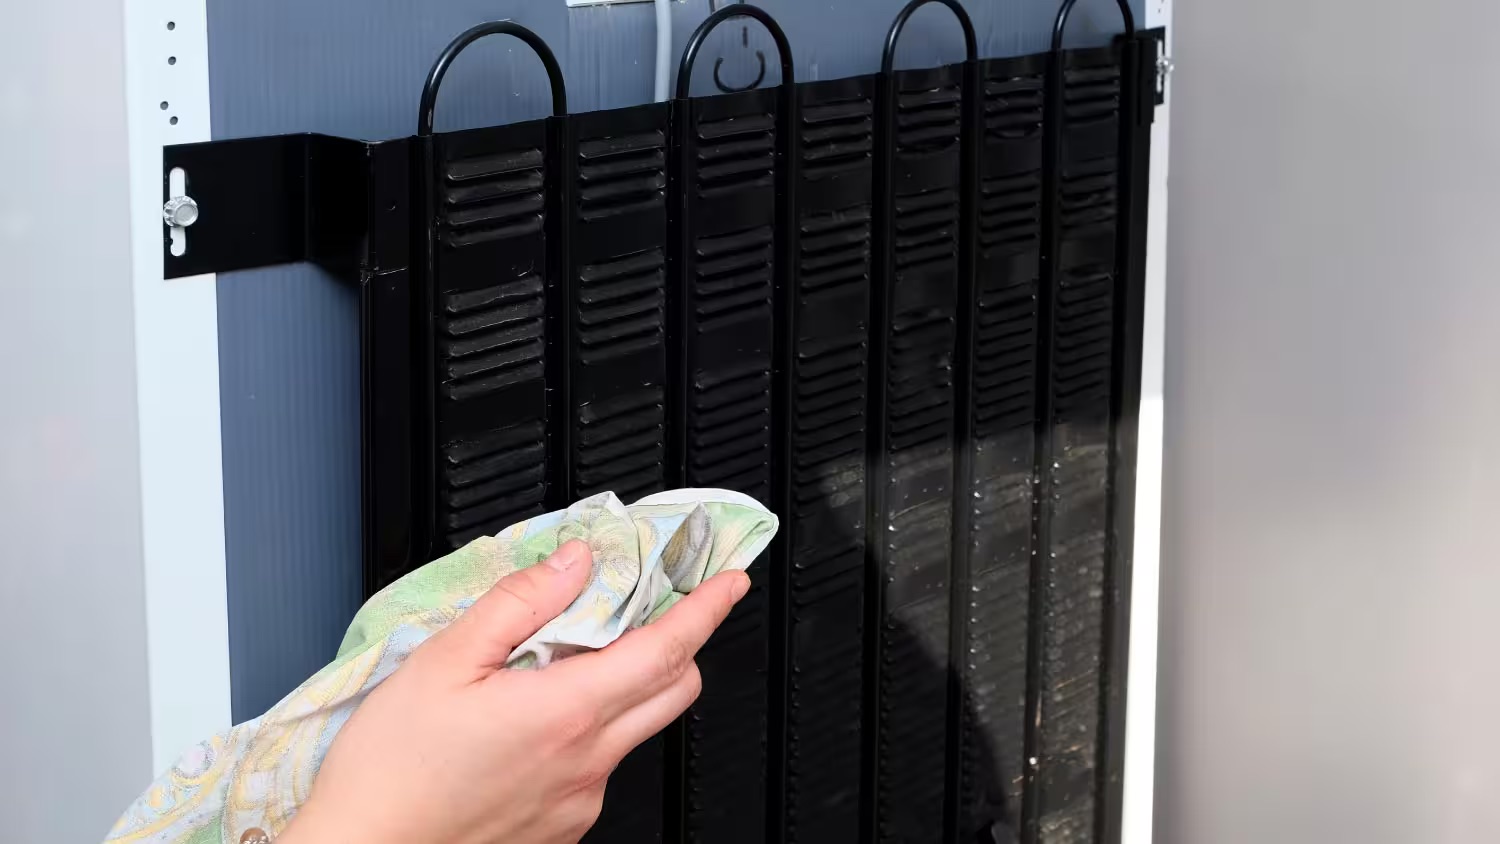 How To Clean Coils On A Fridge: 5 Expert Steps To Cut Energy Costs